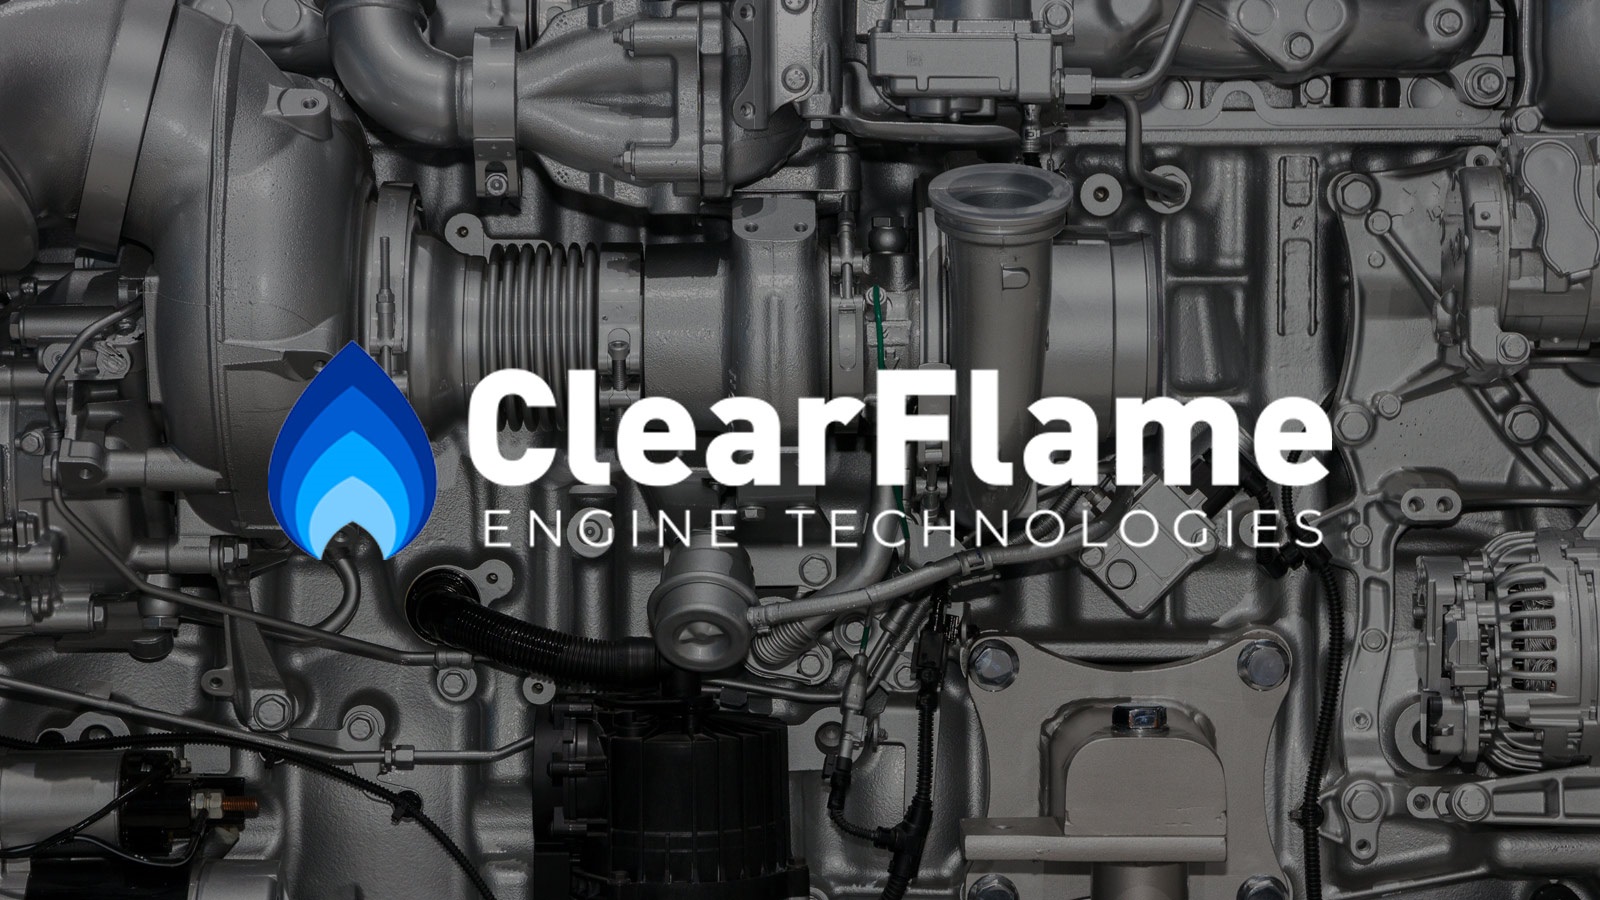 ClearFlame Engine Technologies logo with blue flame on grey mechanical image background. (Image by Shutterstock/VanderWolf Images.)